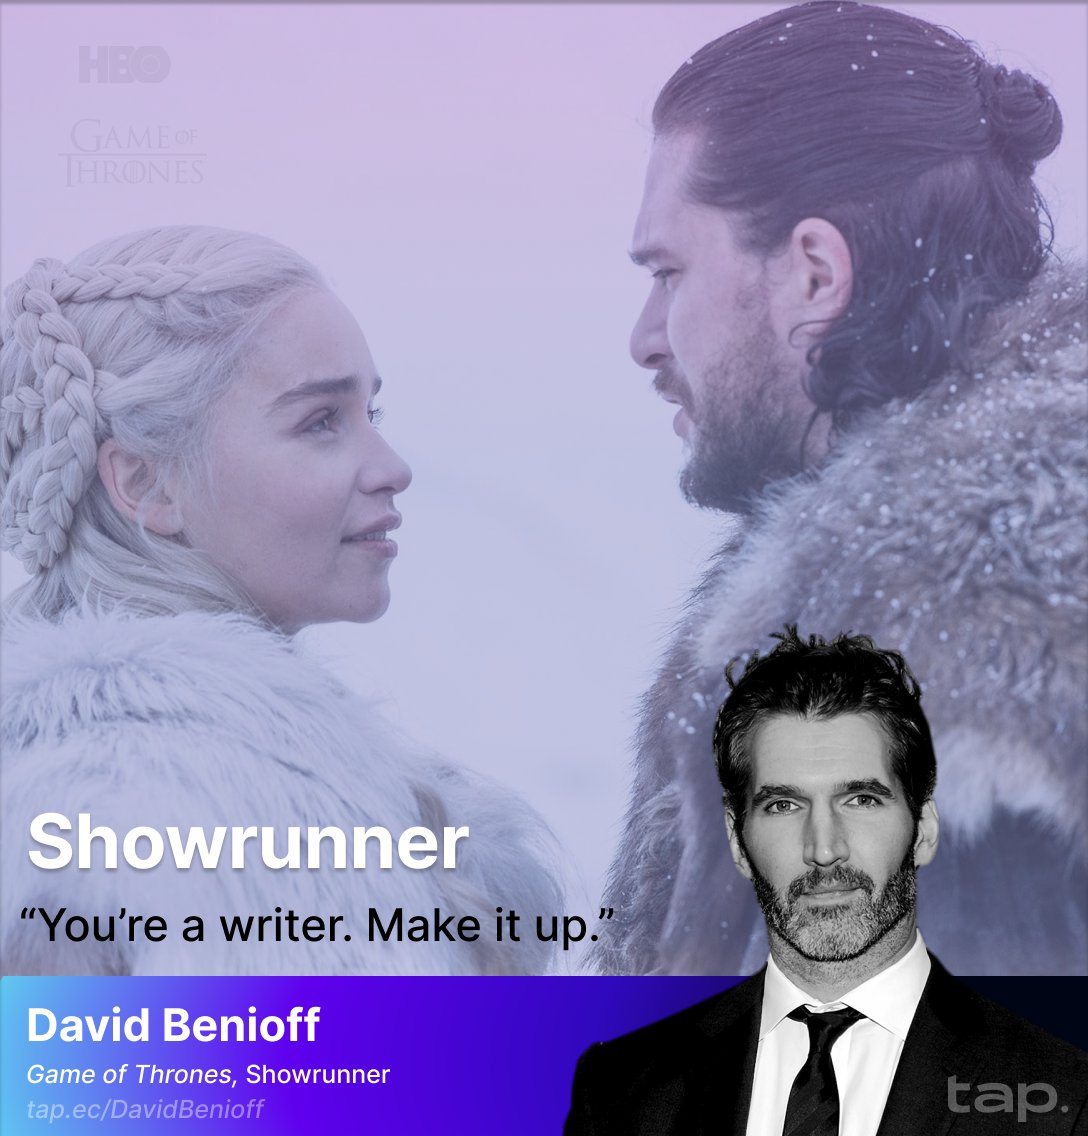 'Winter has come, but I'm still bringing the heat' 🔥 #GameOfThrones David Benioff is known showrunning the HBO fantasy television series @GameOfThrones . 
Join tap. to connect and network other verified showrunners!
#Showrunner #TVProduction #TVDirecting #TVShow #Television